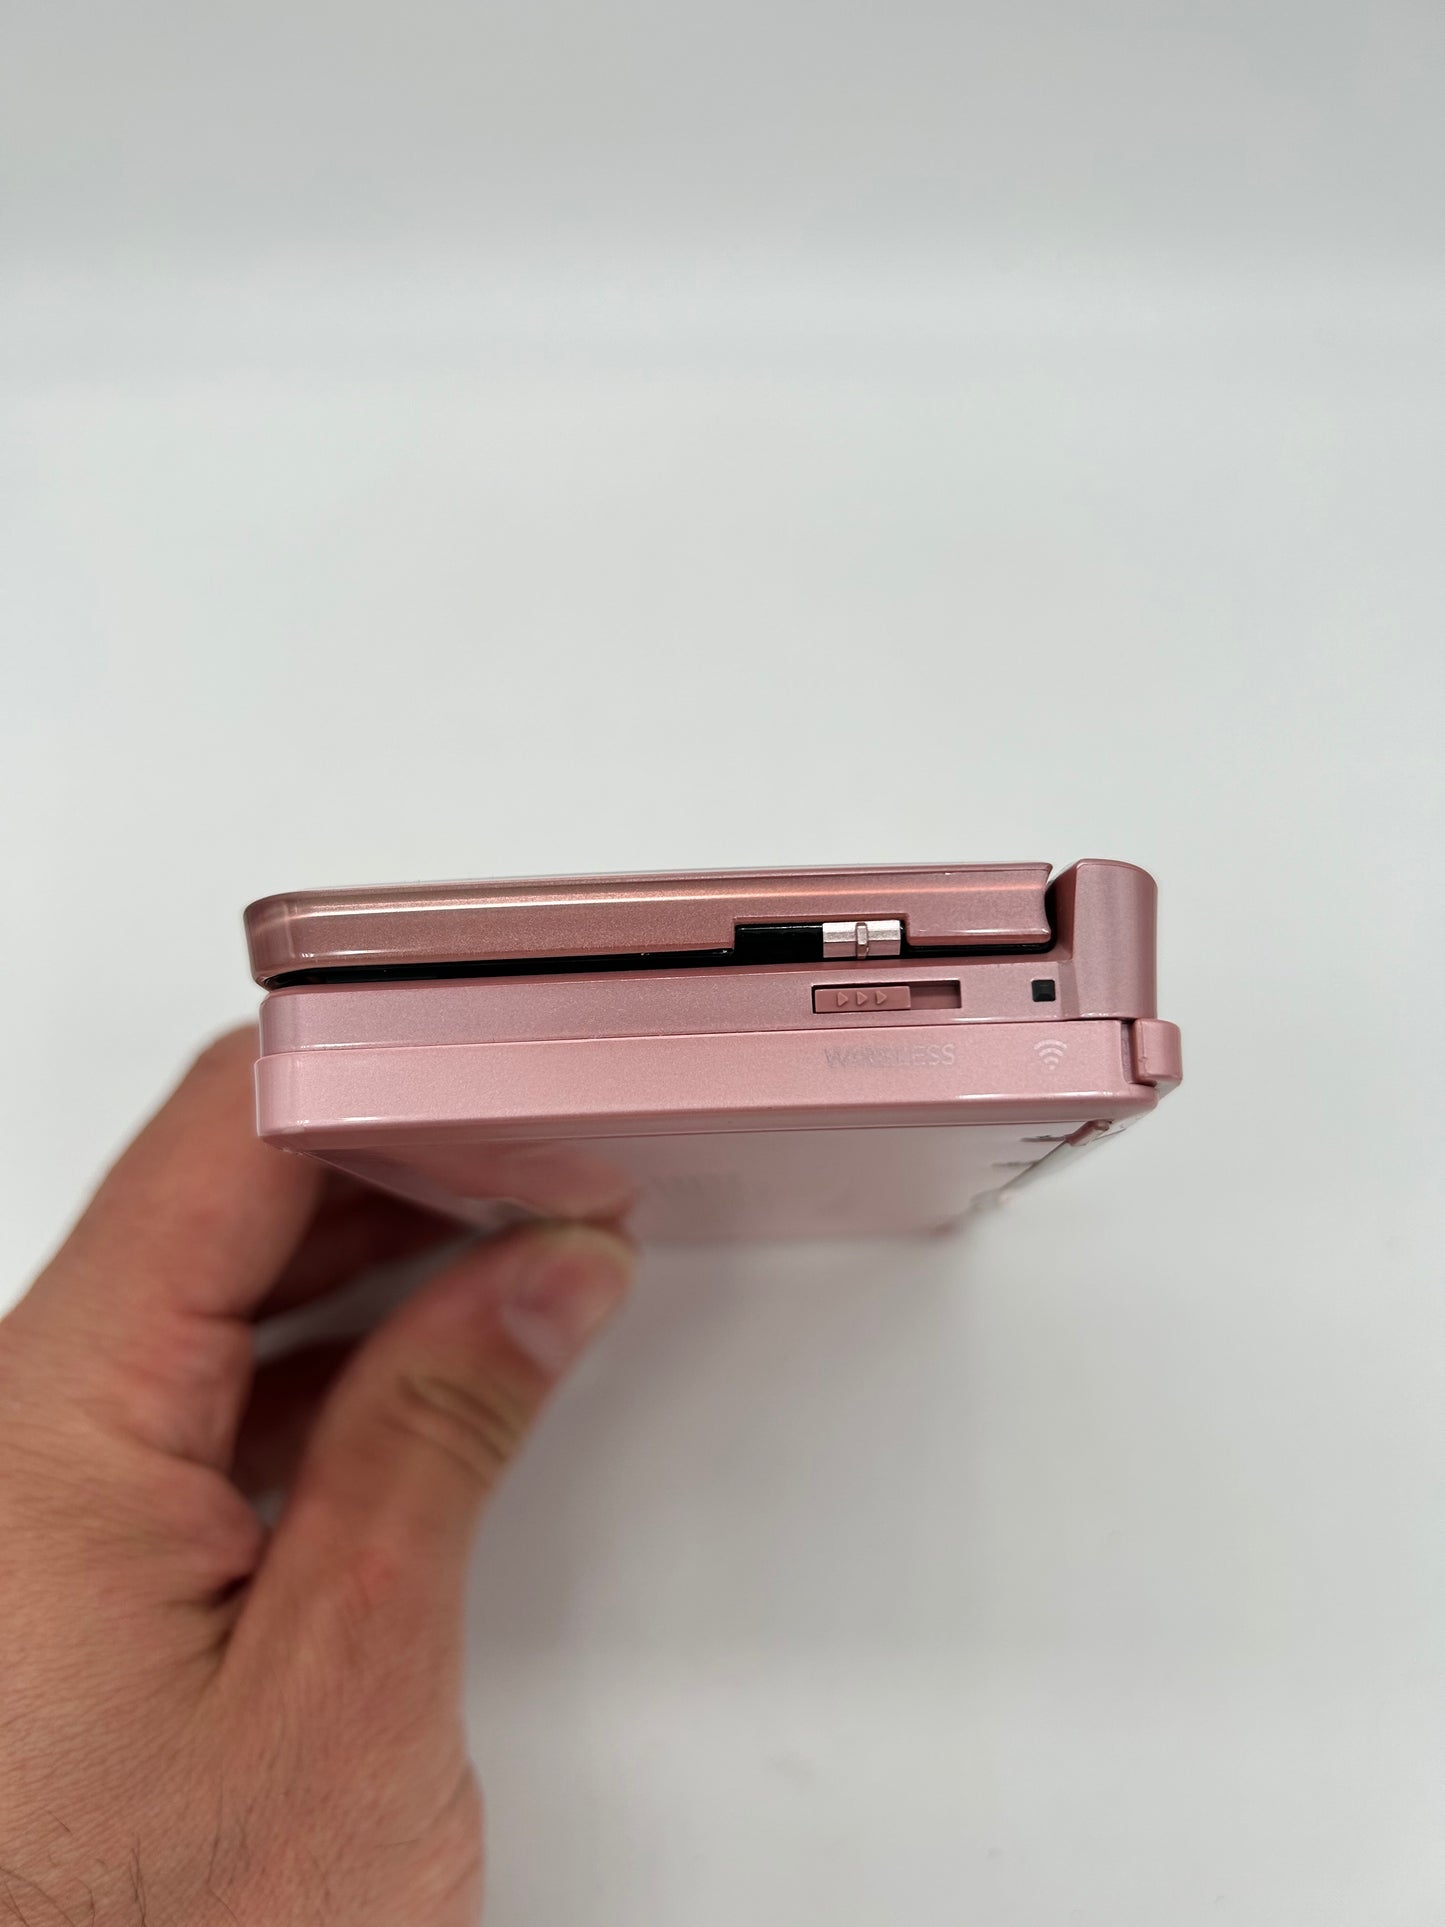 NiNTENDO 3DS CONSOLE | MODEL PINK PEARL PEARL PiNK CTR-001(USA)